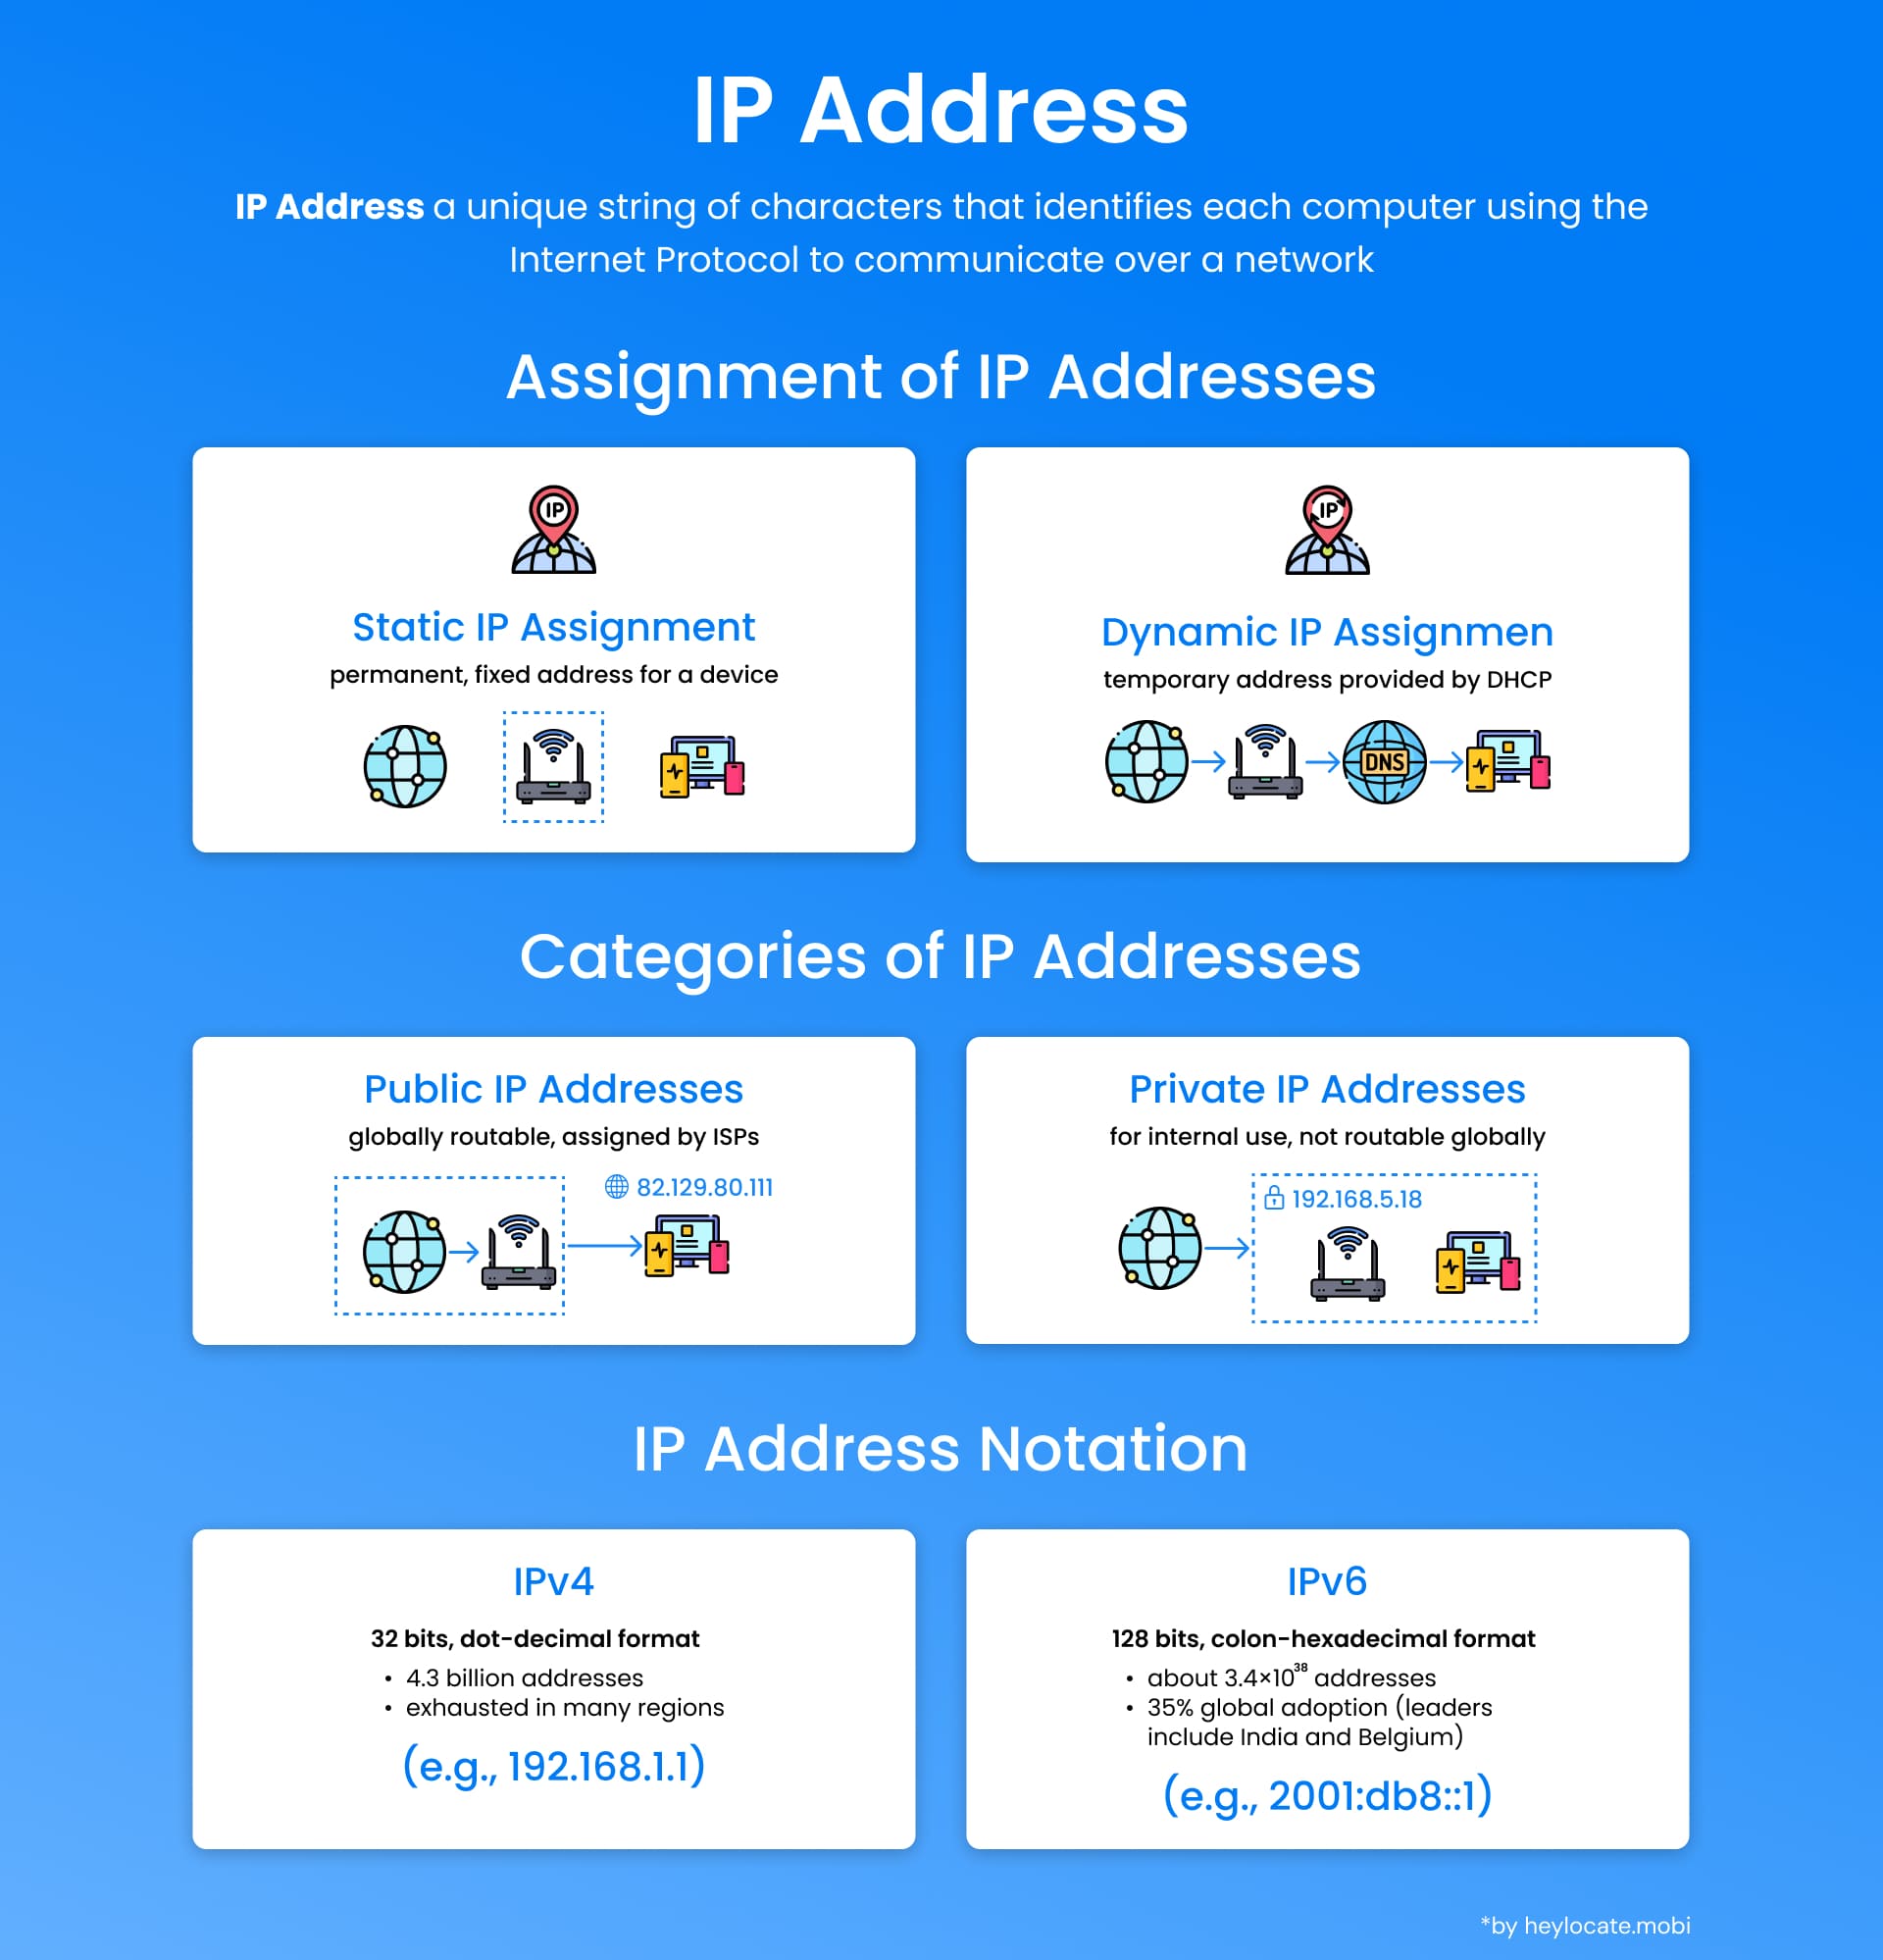 A graphic explaining IP addresses, including static and dynamic assignments, categories, and IPv4 vs. IPv6 notations